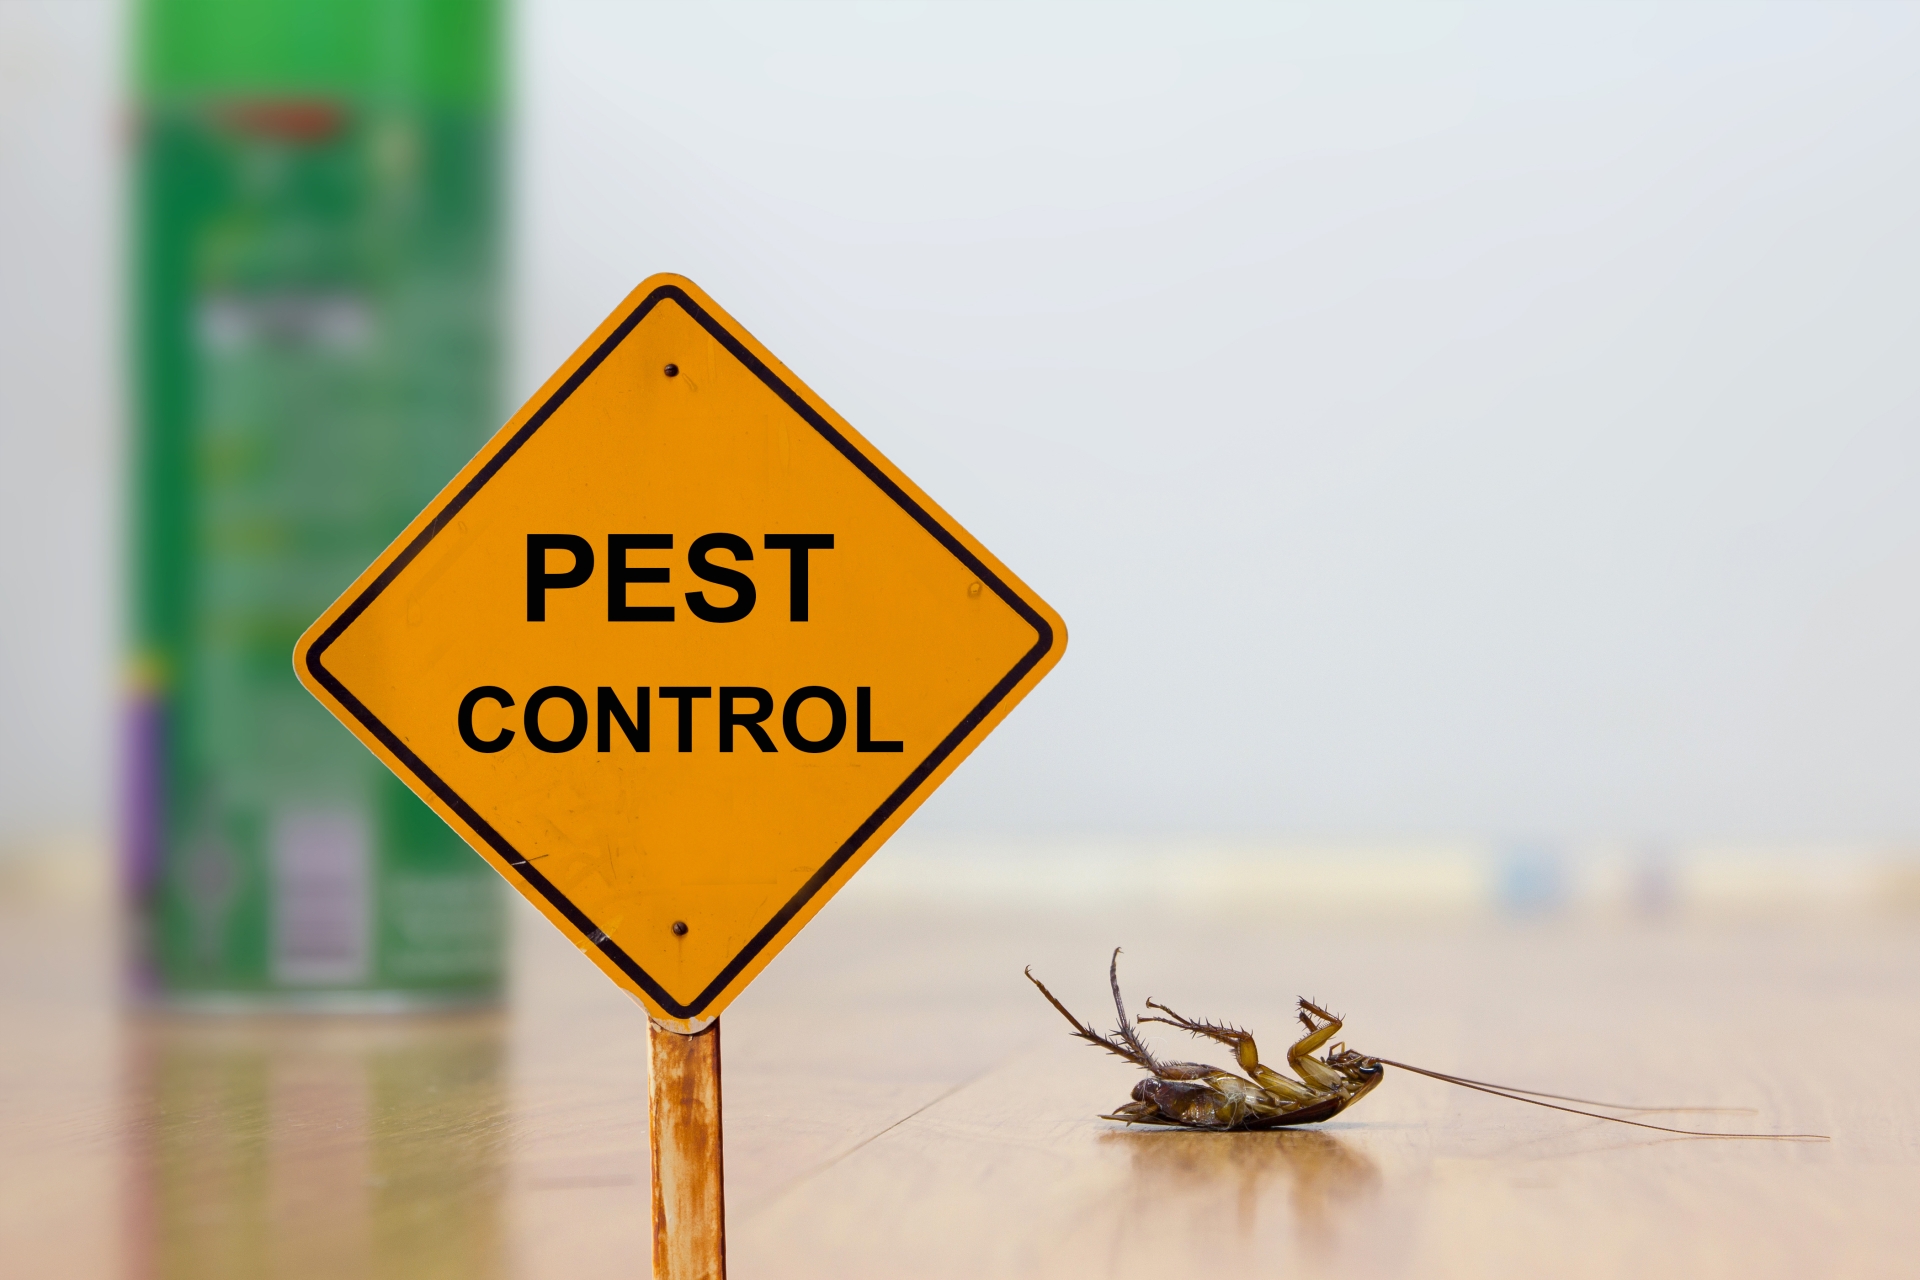 24 Hour Pest Control, Pest Control in Stamford Hill, Stoke Newington, N16. Call Now 020 8166 9746